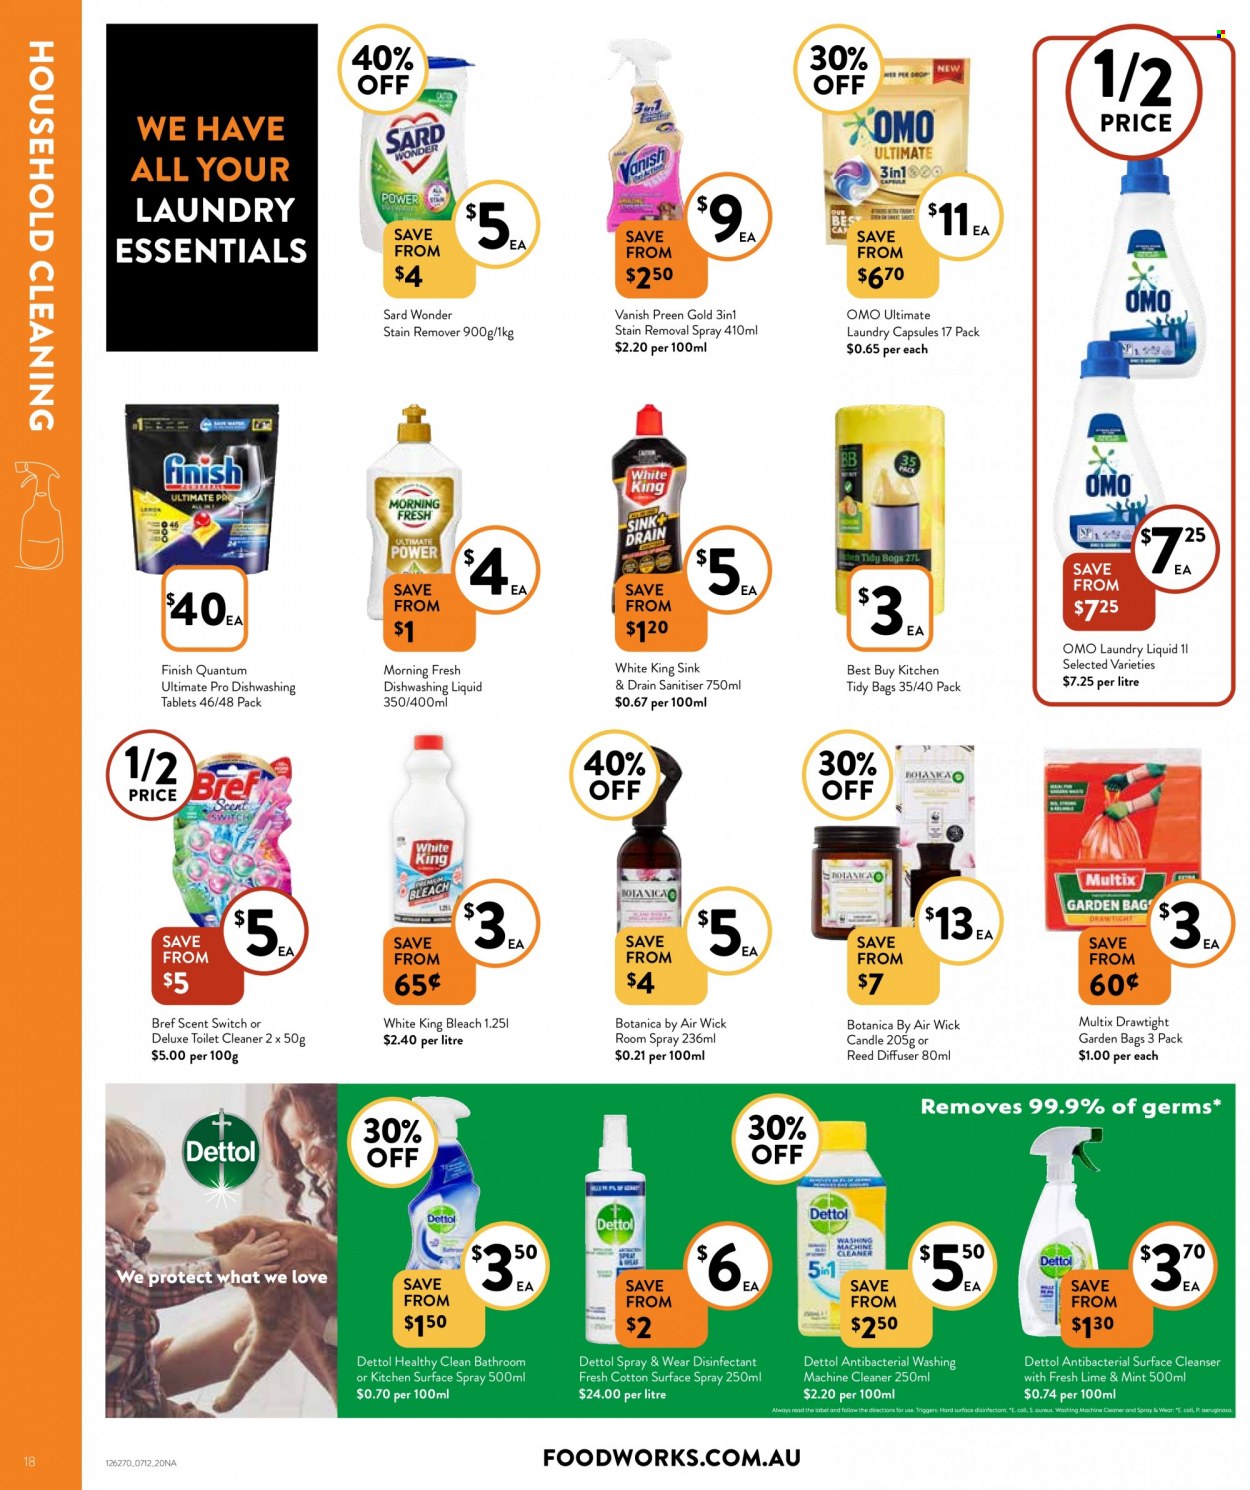 thumbnail - Foodworks Catalogue - 7 Dec 2022 - 13 Dec 2022 - Sales products - Dettol, cleaner, bleach, desinfection, toilet cleaner, stain remover, washing machine cleaner, Vanish, Omo, laundry detergent, laundry capsules, dishwashing liquid, Finish Powerball, Finish Quantum Ultimate, cleanser, bag, candle, diffuser, Air Wick. Page 18.